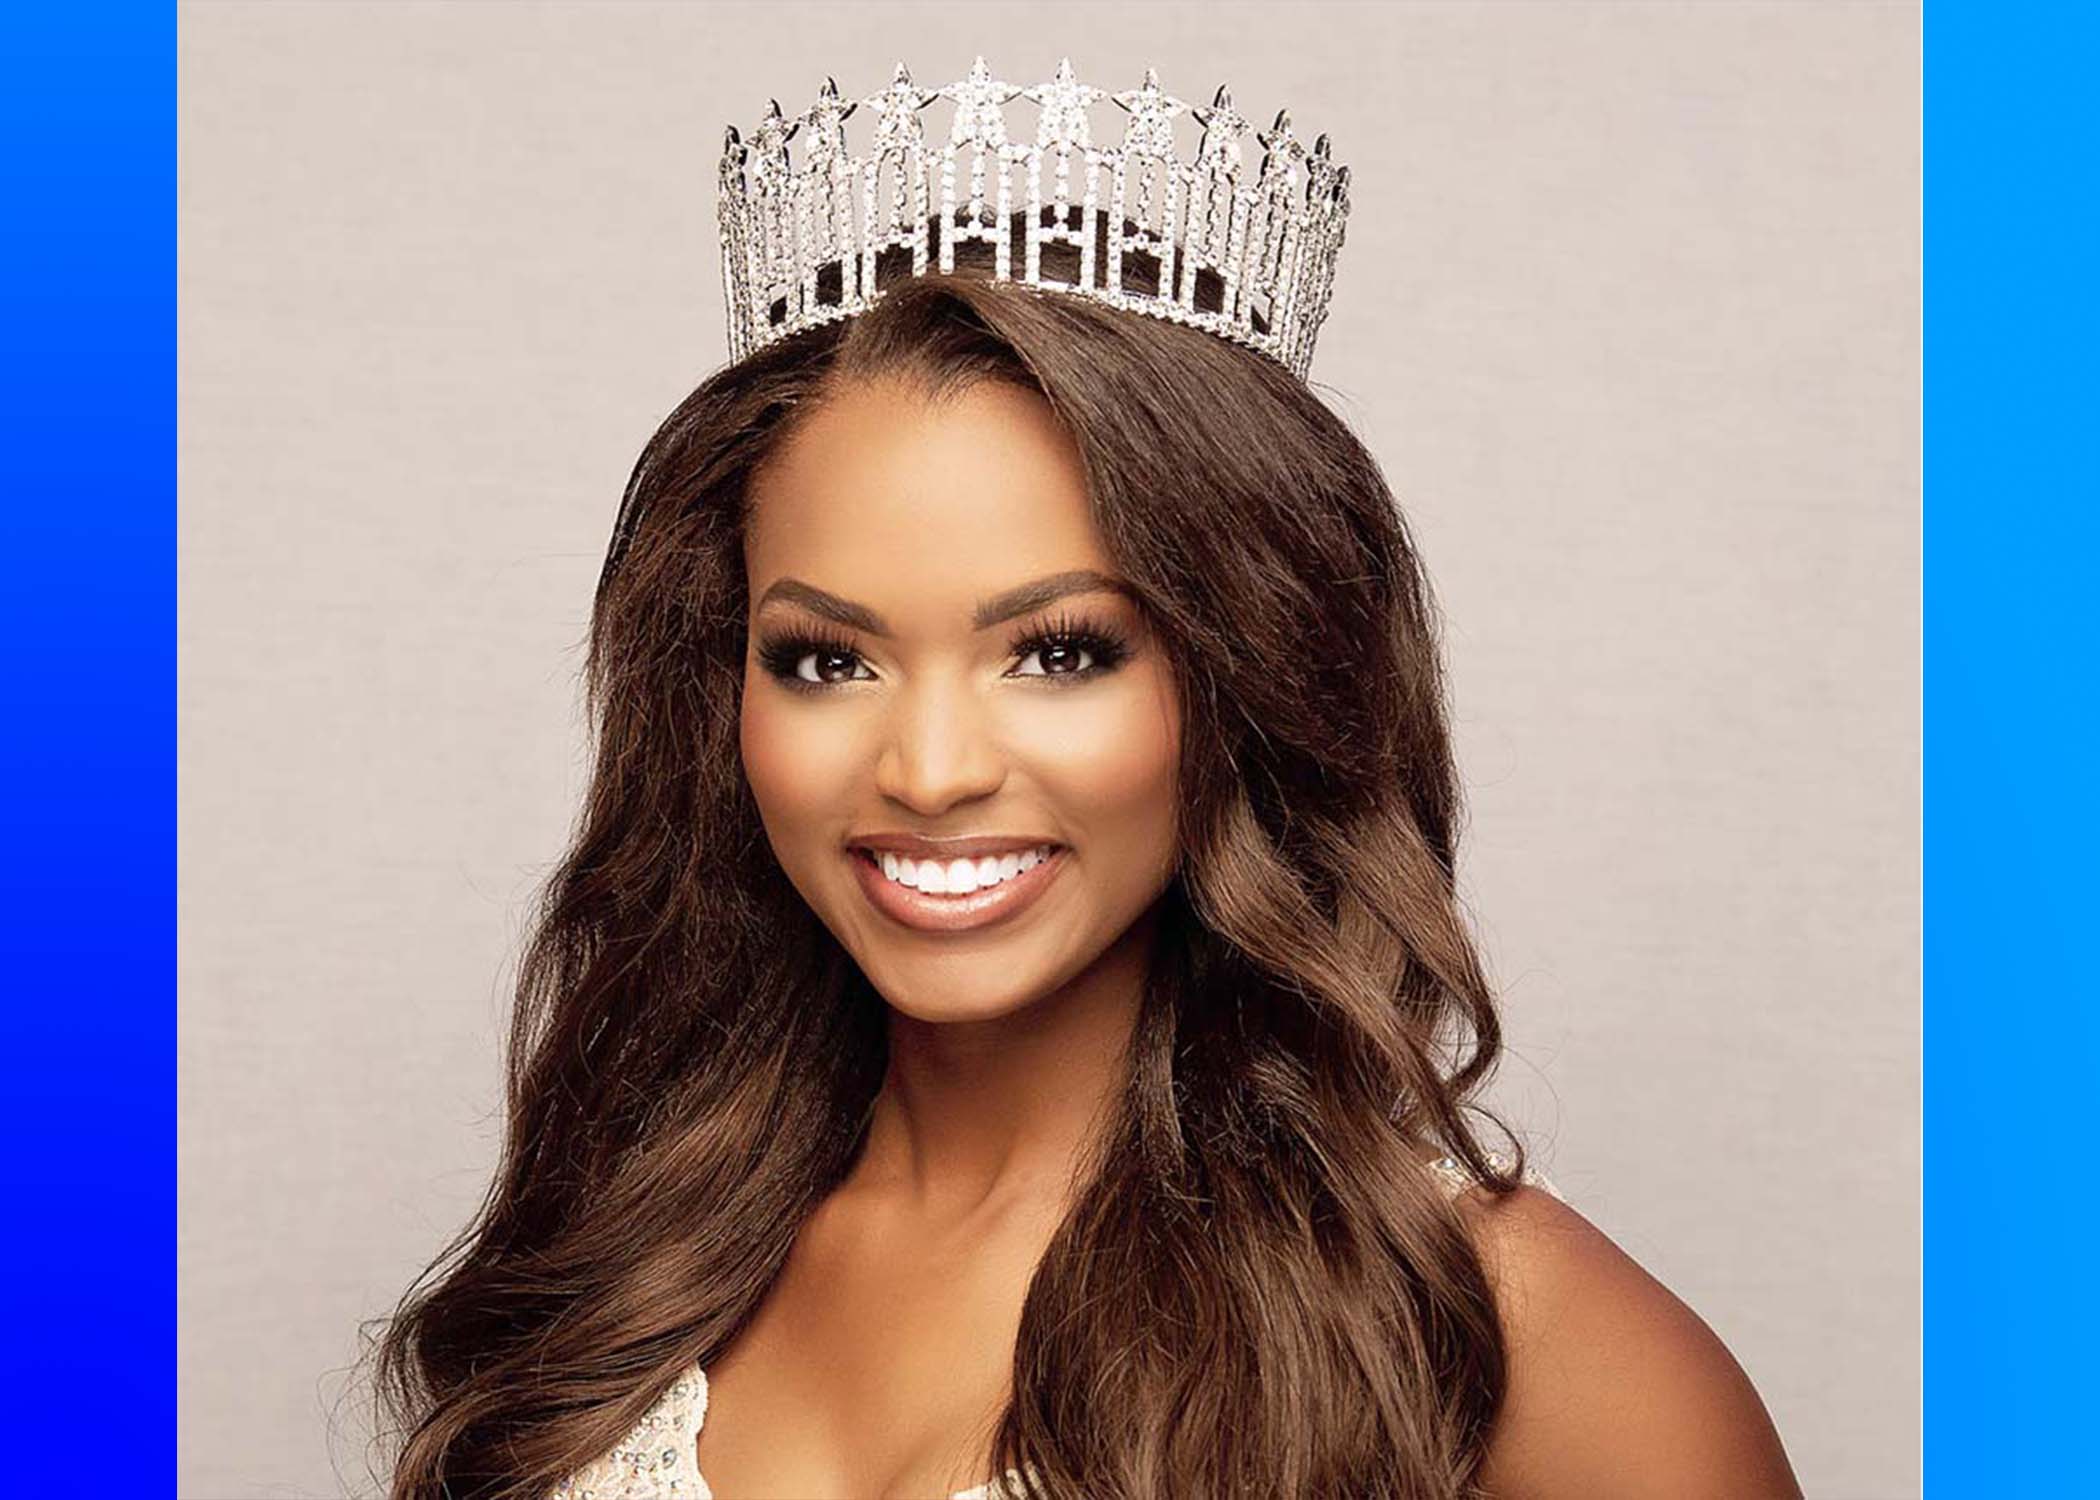 Miss USA to address children of incarcerated parents in Birmingham